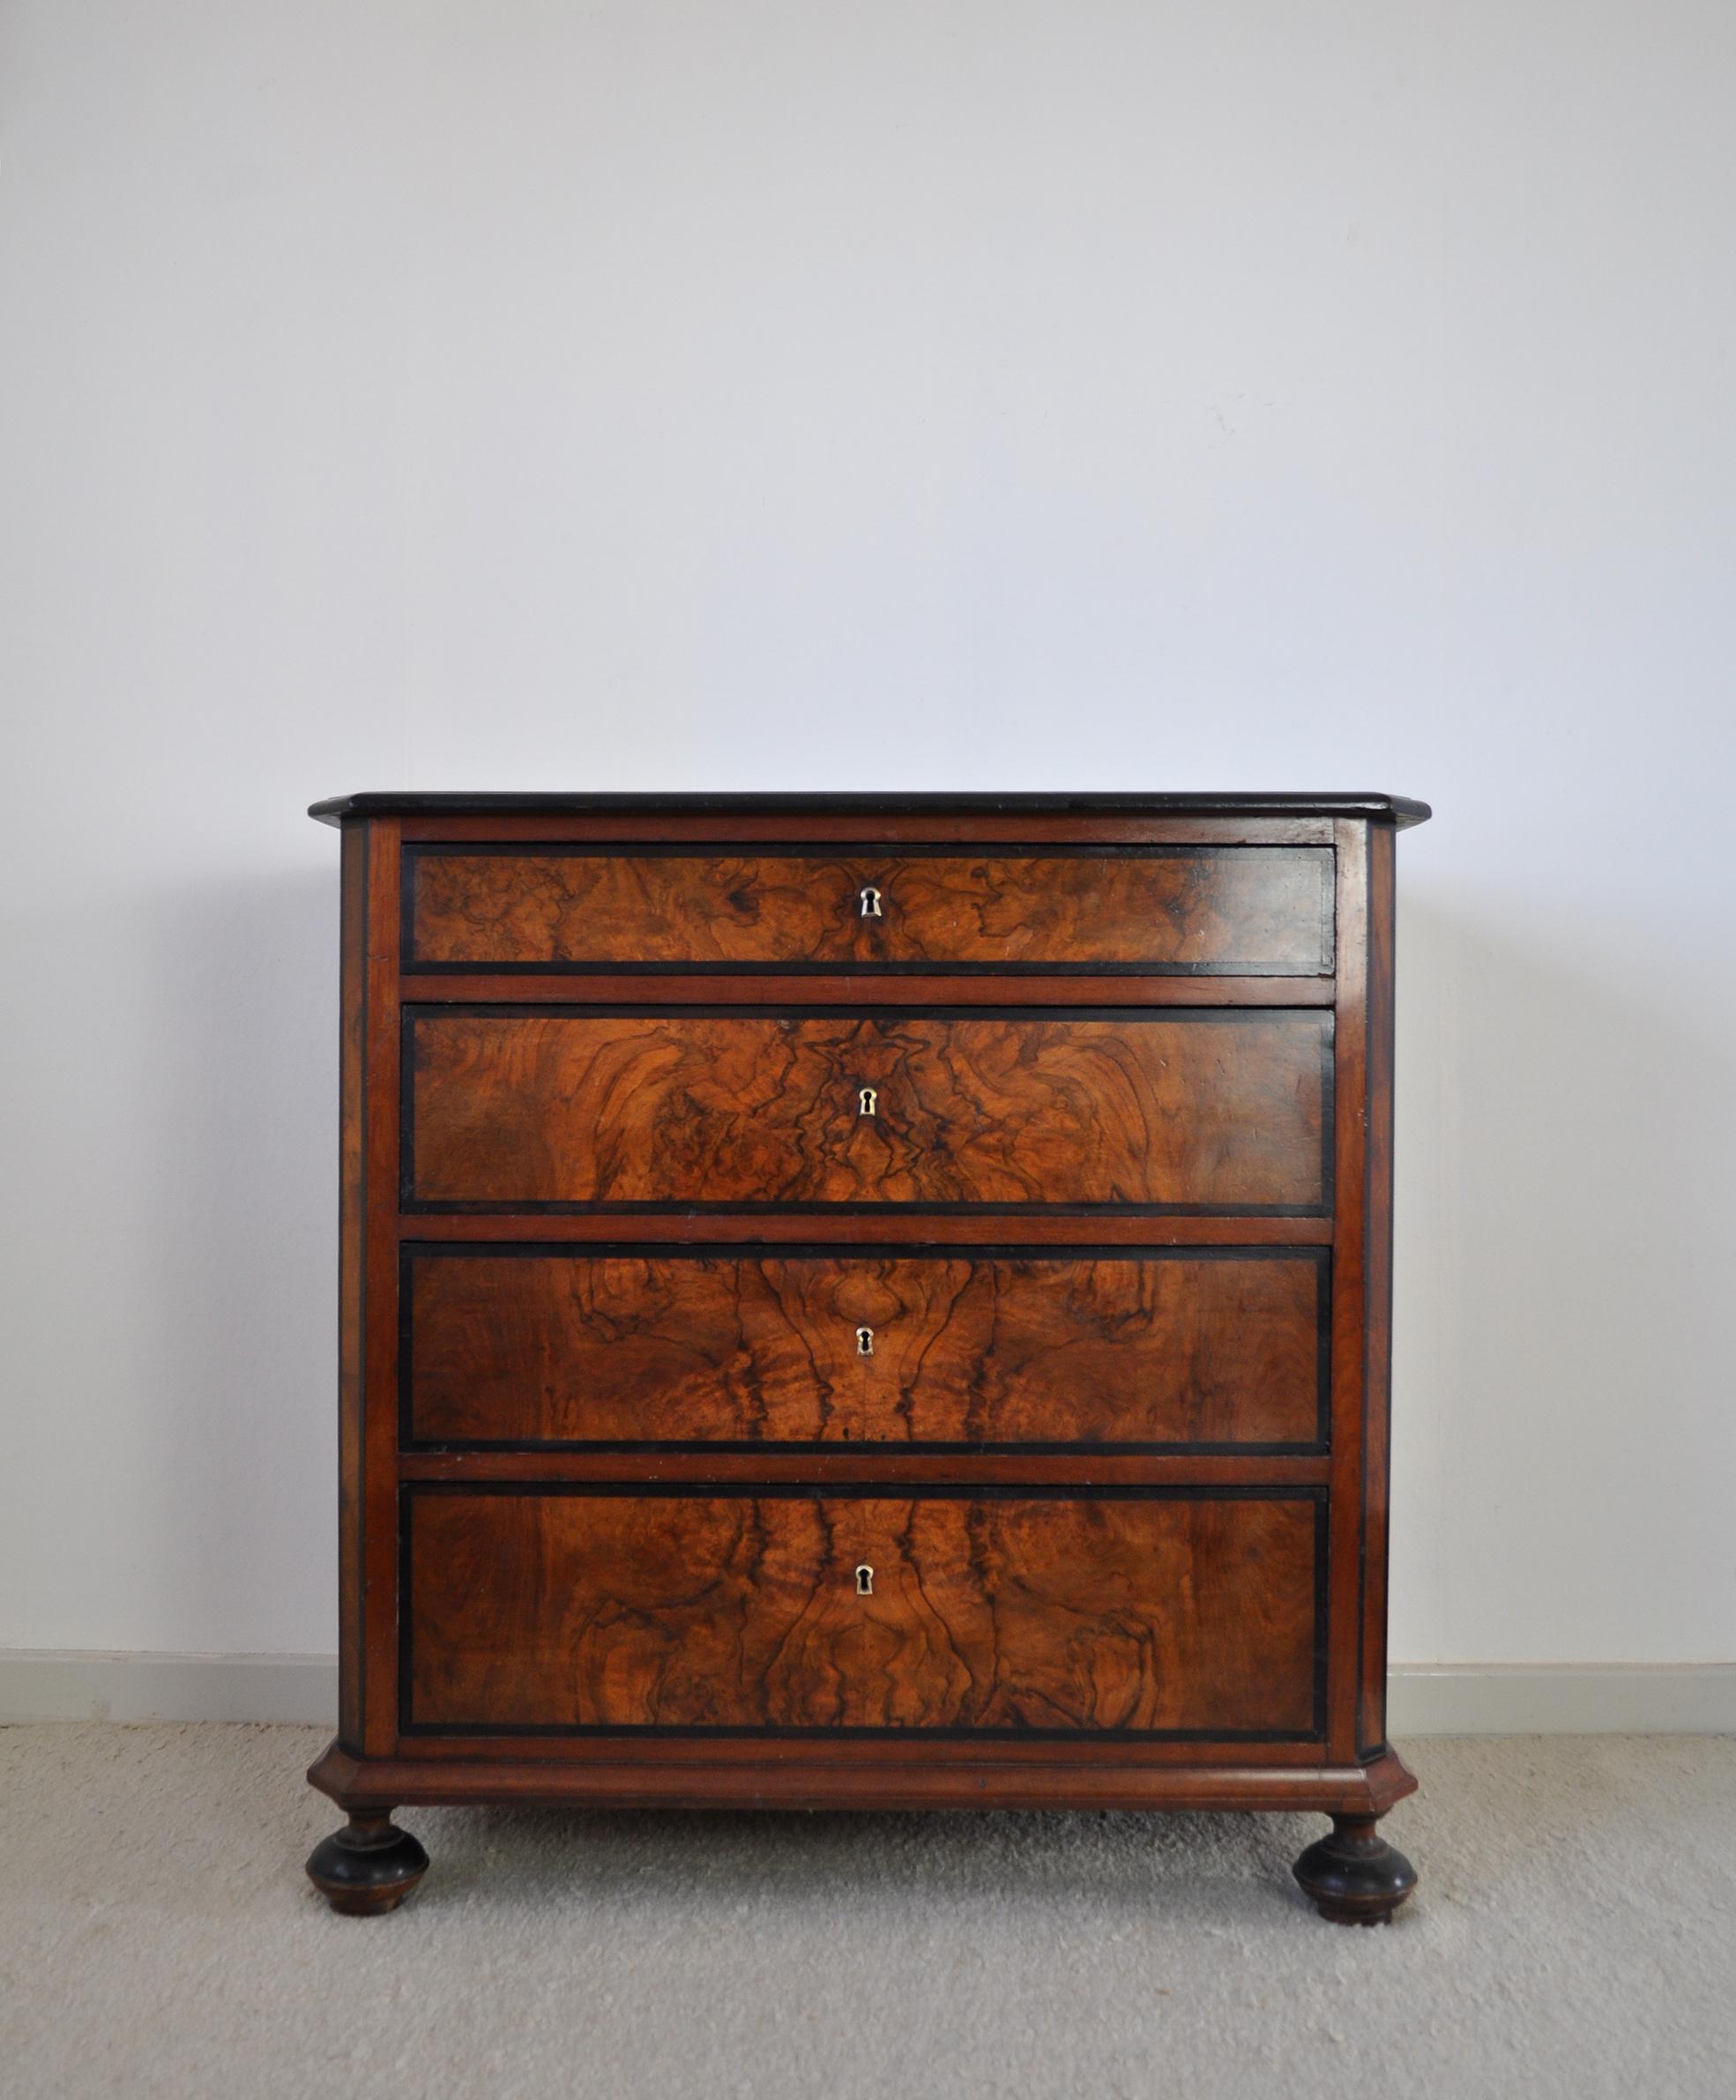 A fine chest of drawers or commode of flame walnut and mahogany with ebonized details throughout. The chest rests on original turned front feet and square back feet and features four storage drawers, offering a shallower one at the top. 19th